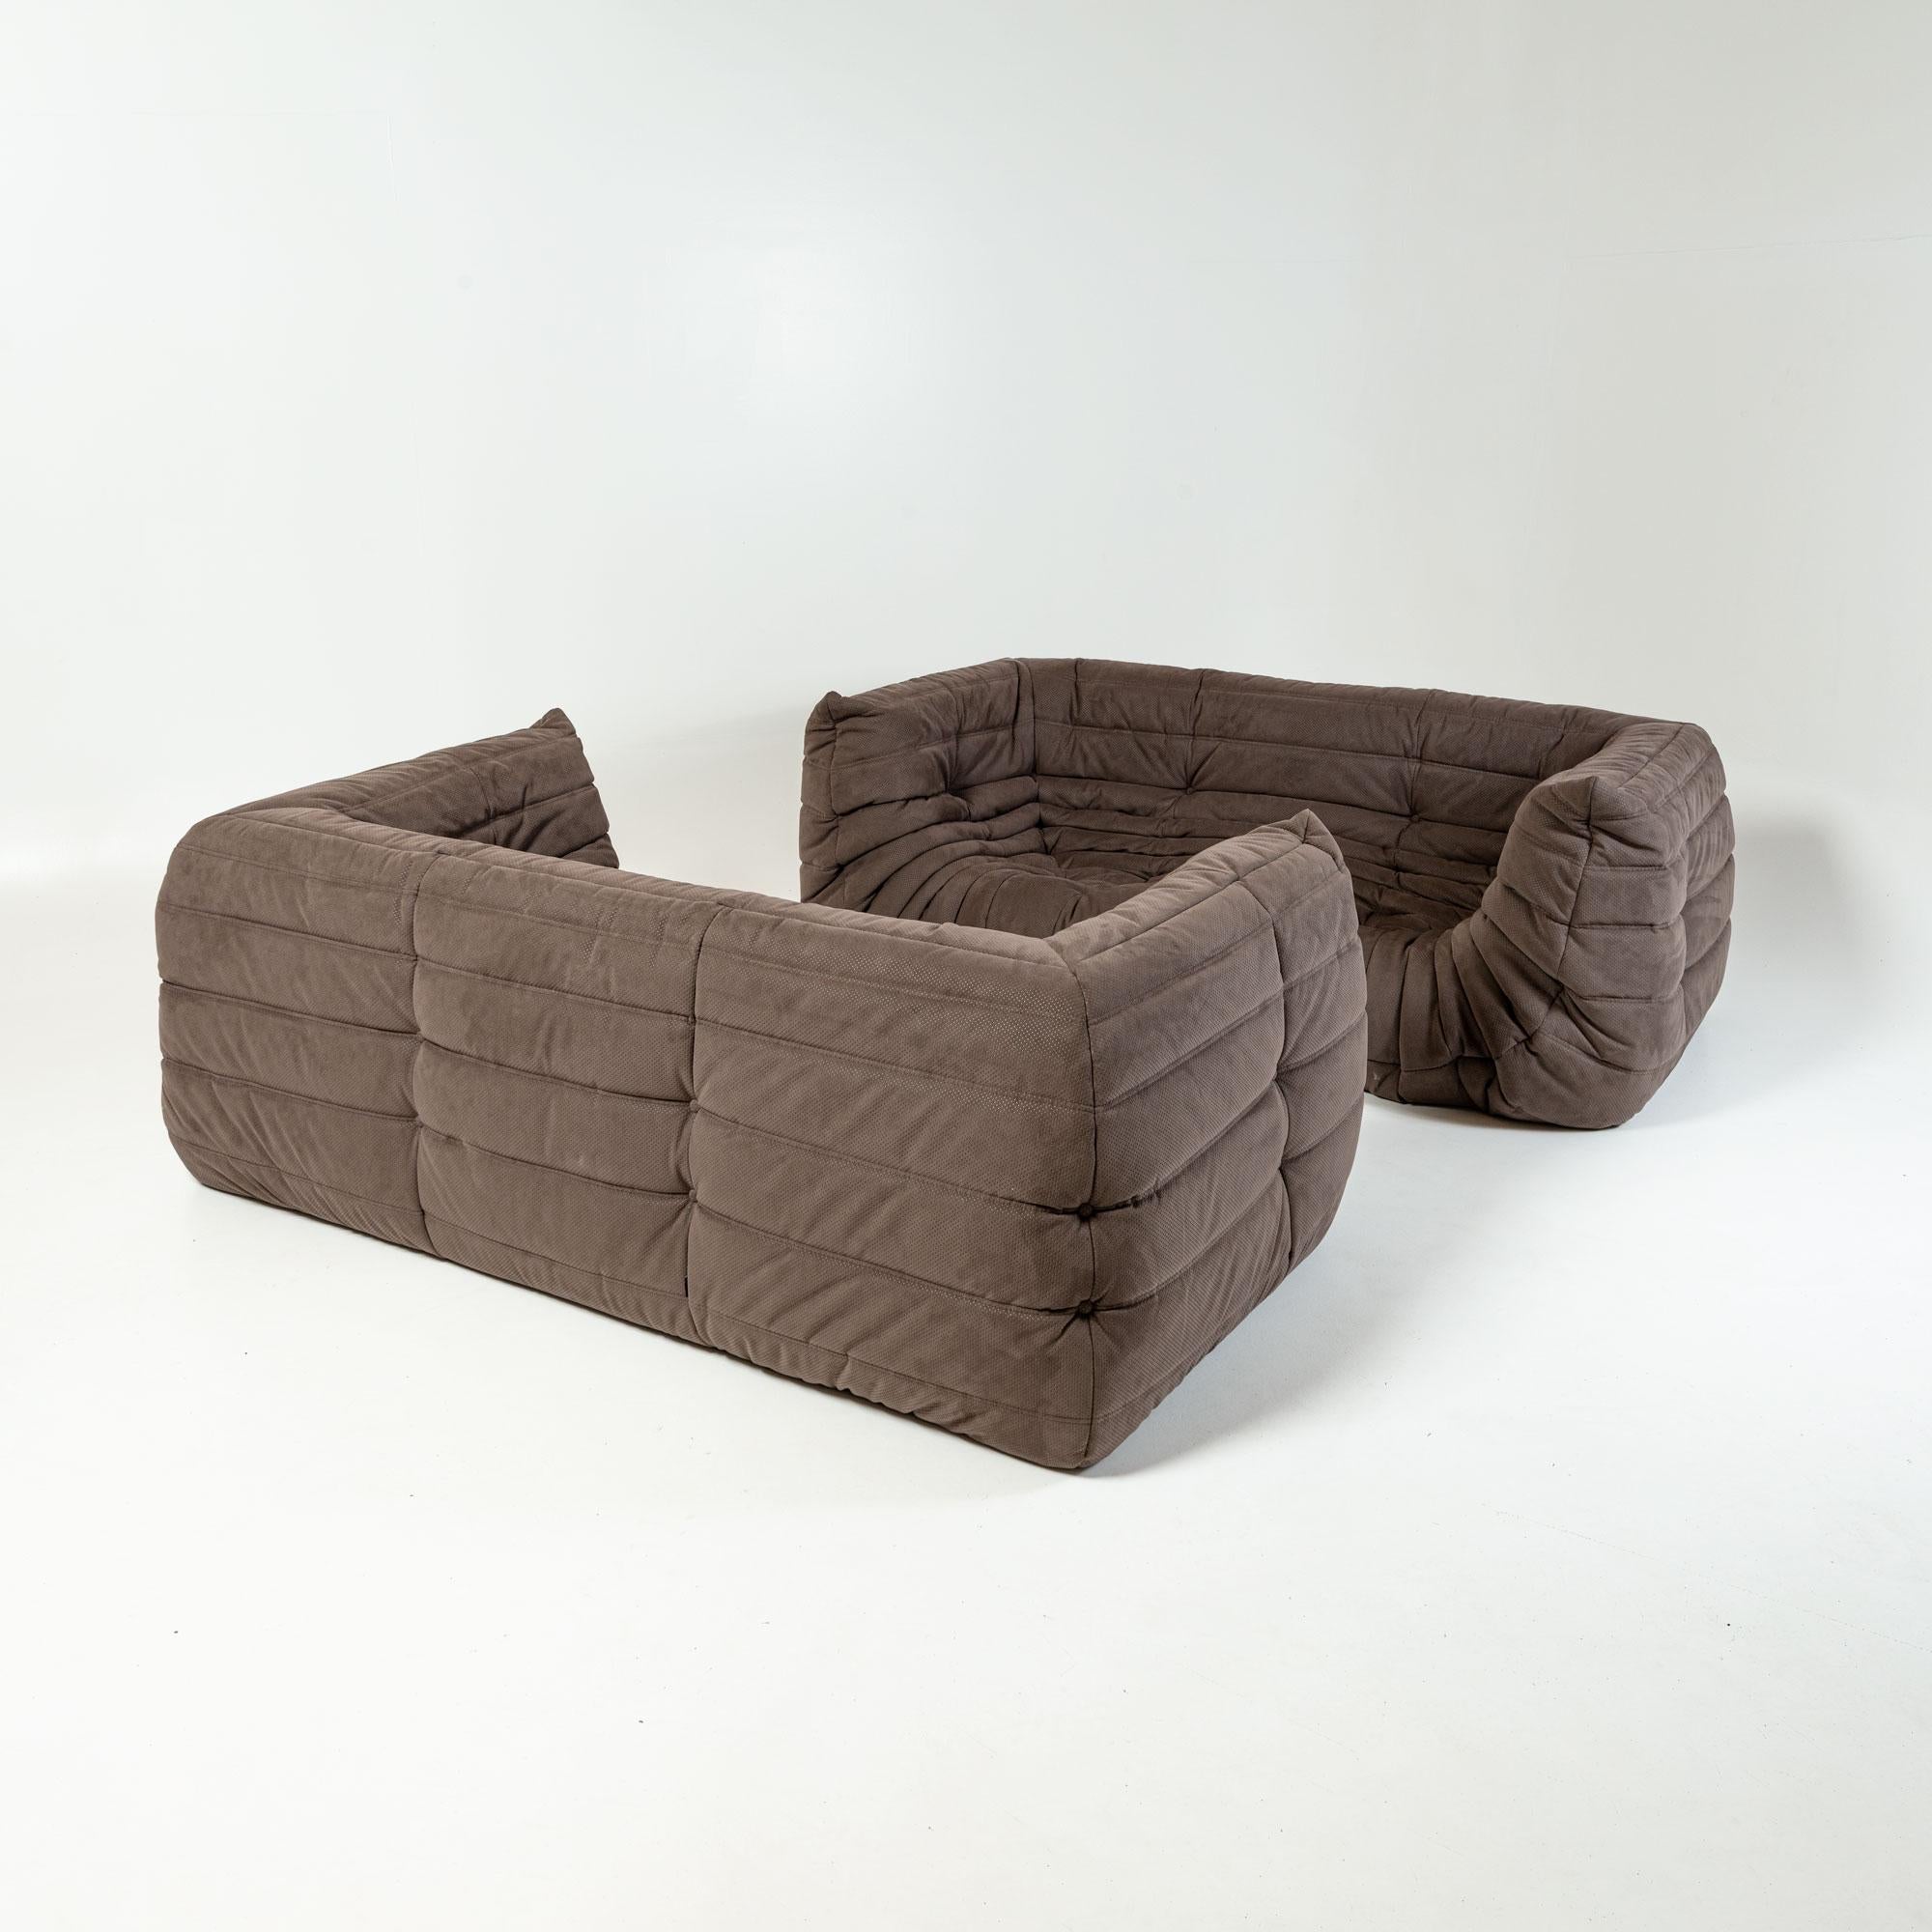 Foam Michel Ducaroy's Togo Sofa with Arms in Brown Perforated Alcantara